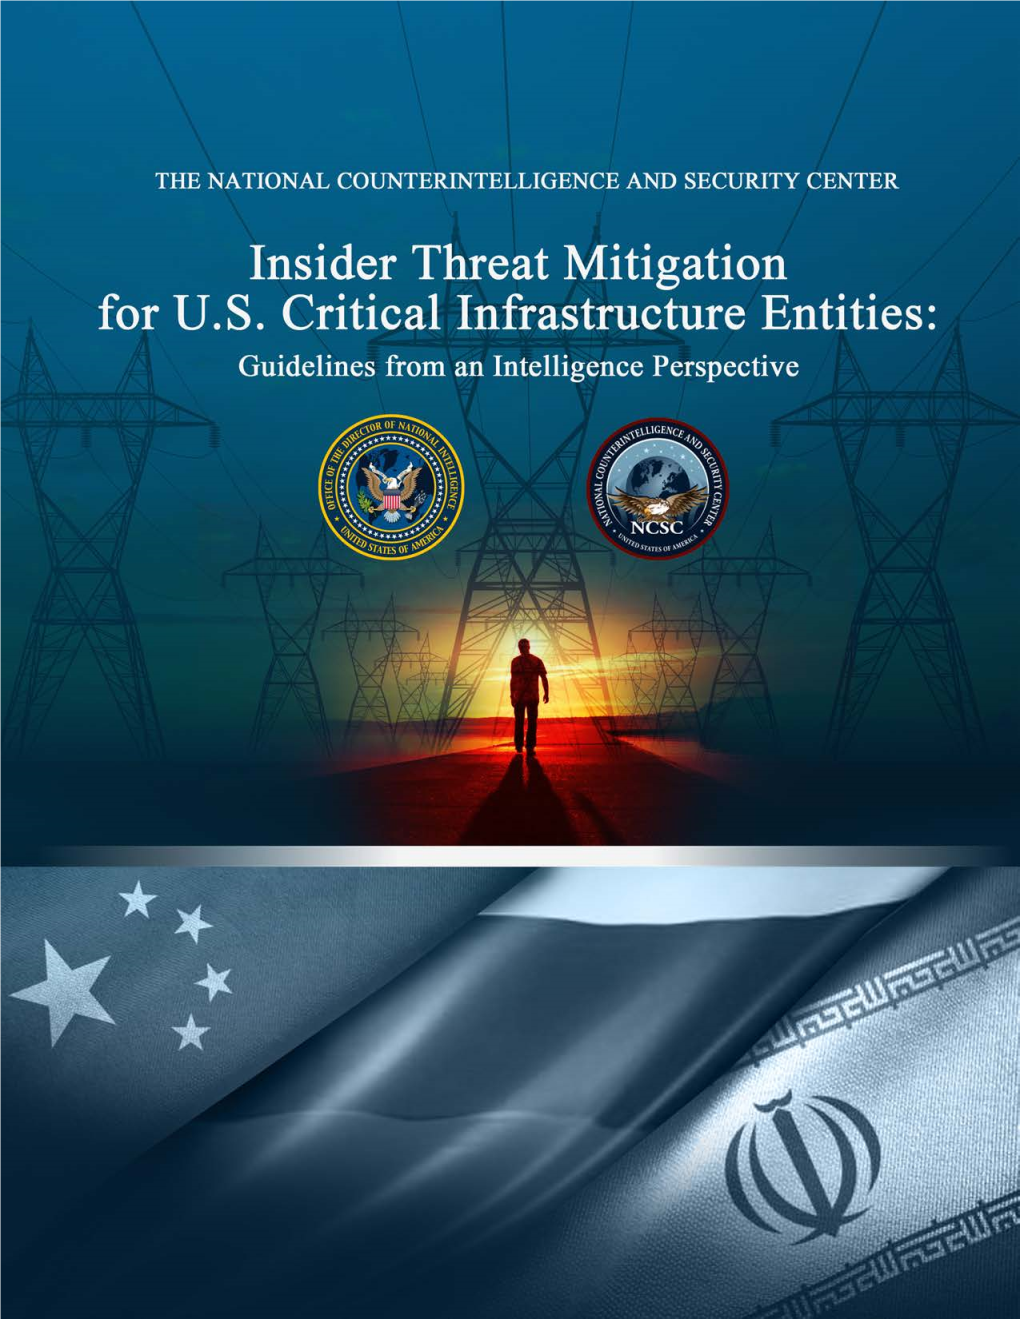 Insider Threat Mitigation for U.S. Critical Infrastructure Entities: Guidelines from an Intelligence Perspective